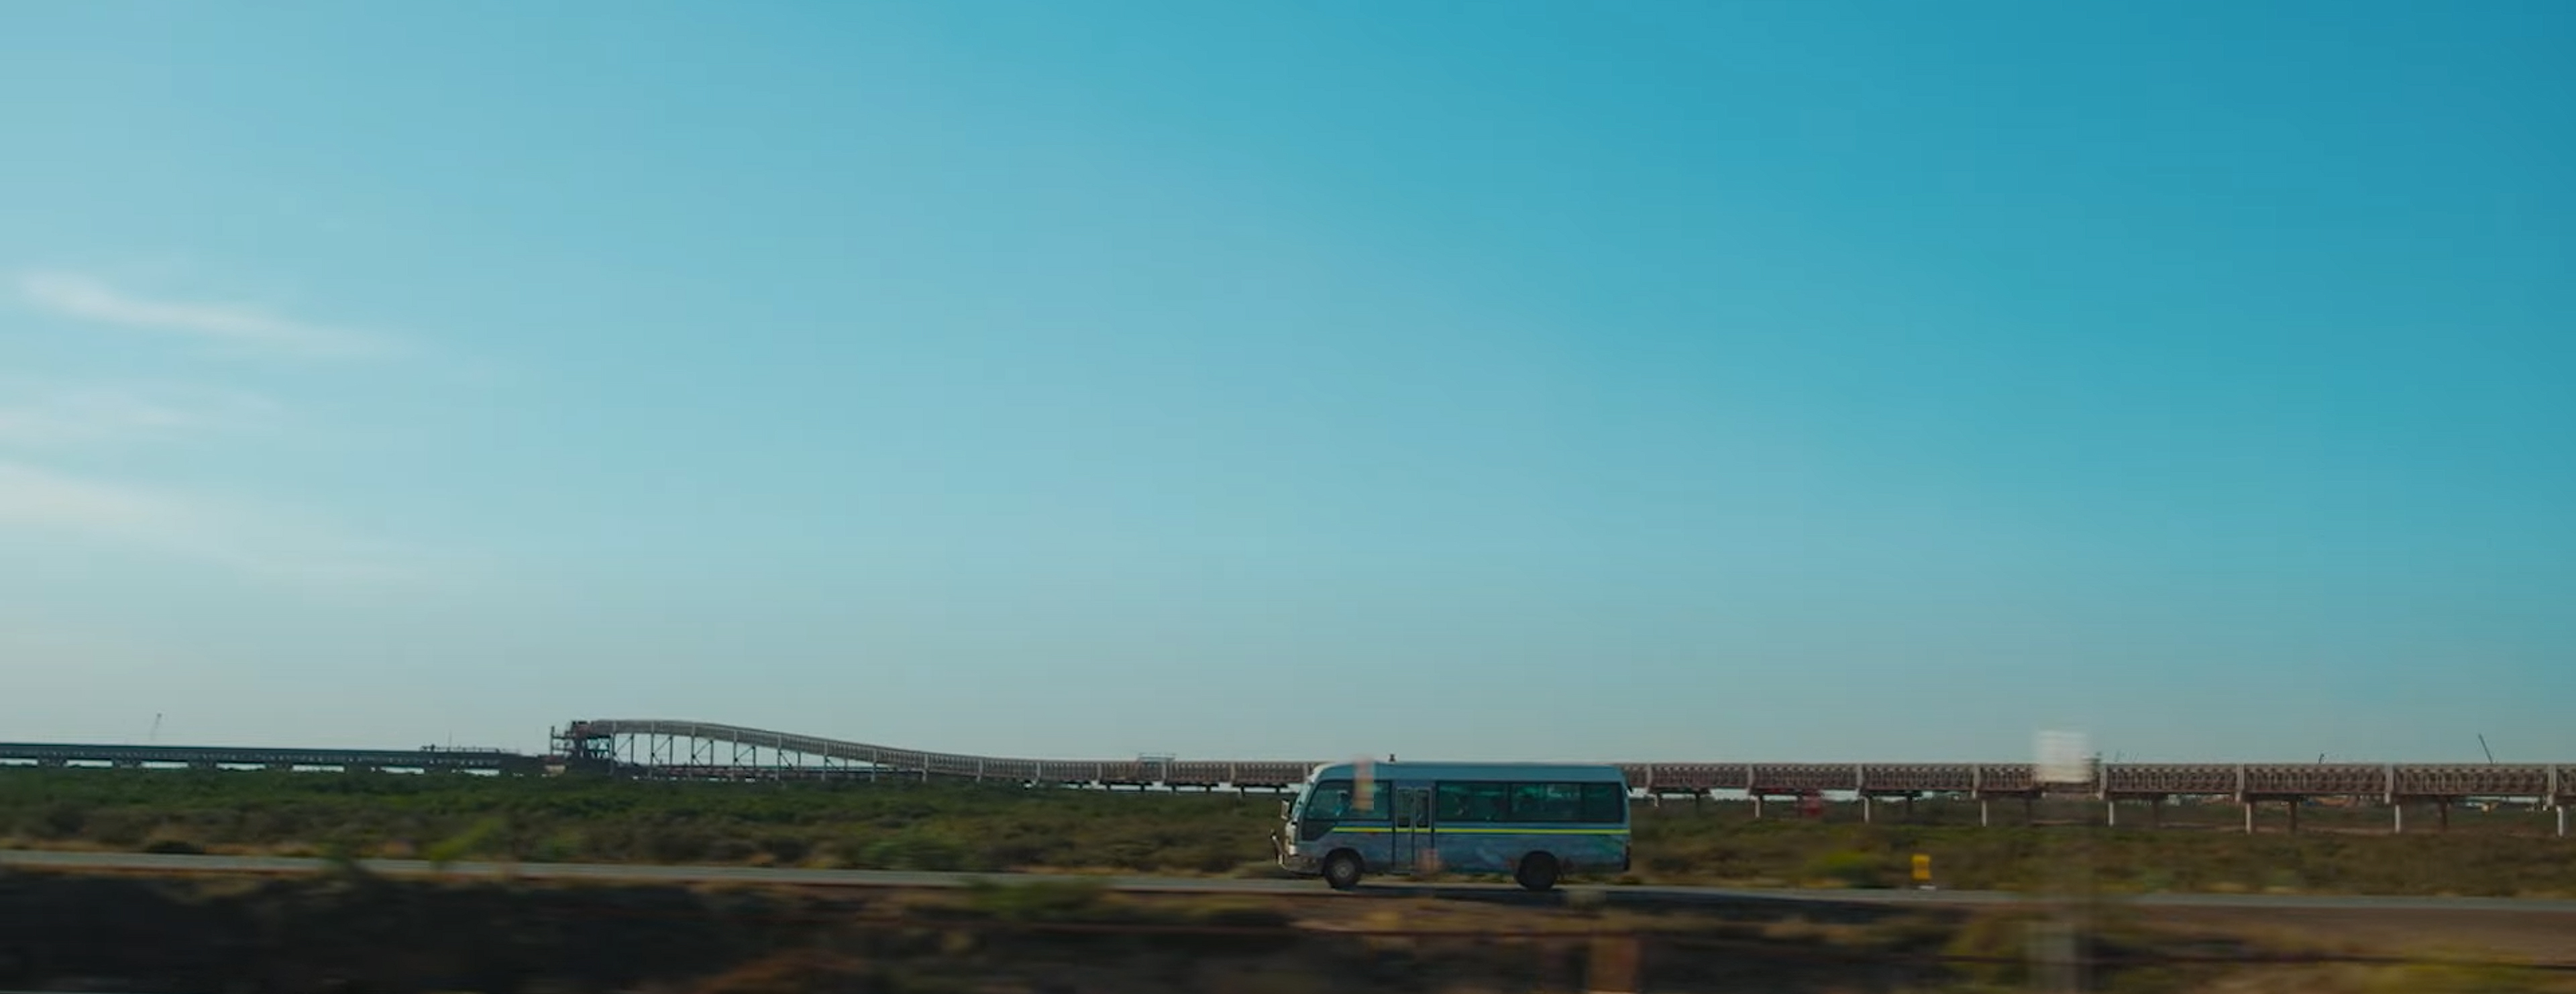 The bus on the highway.